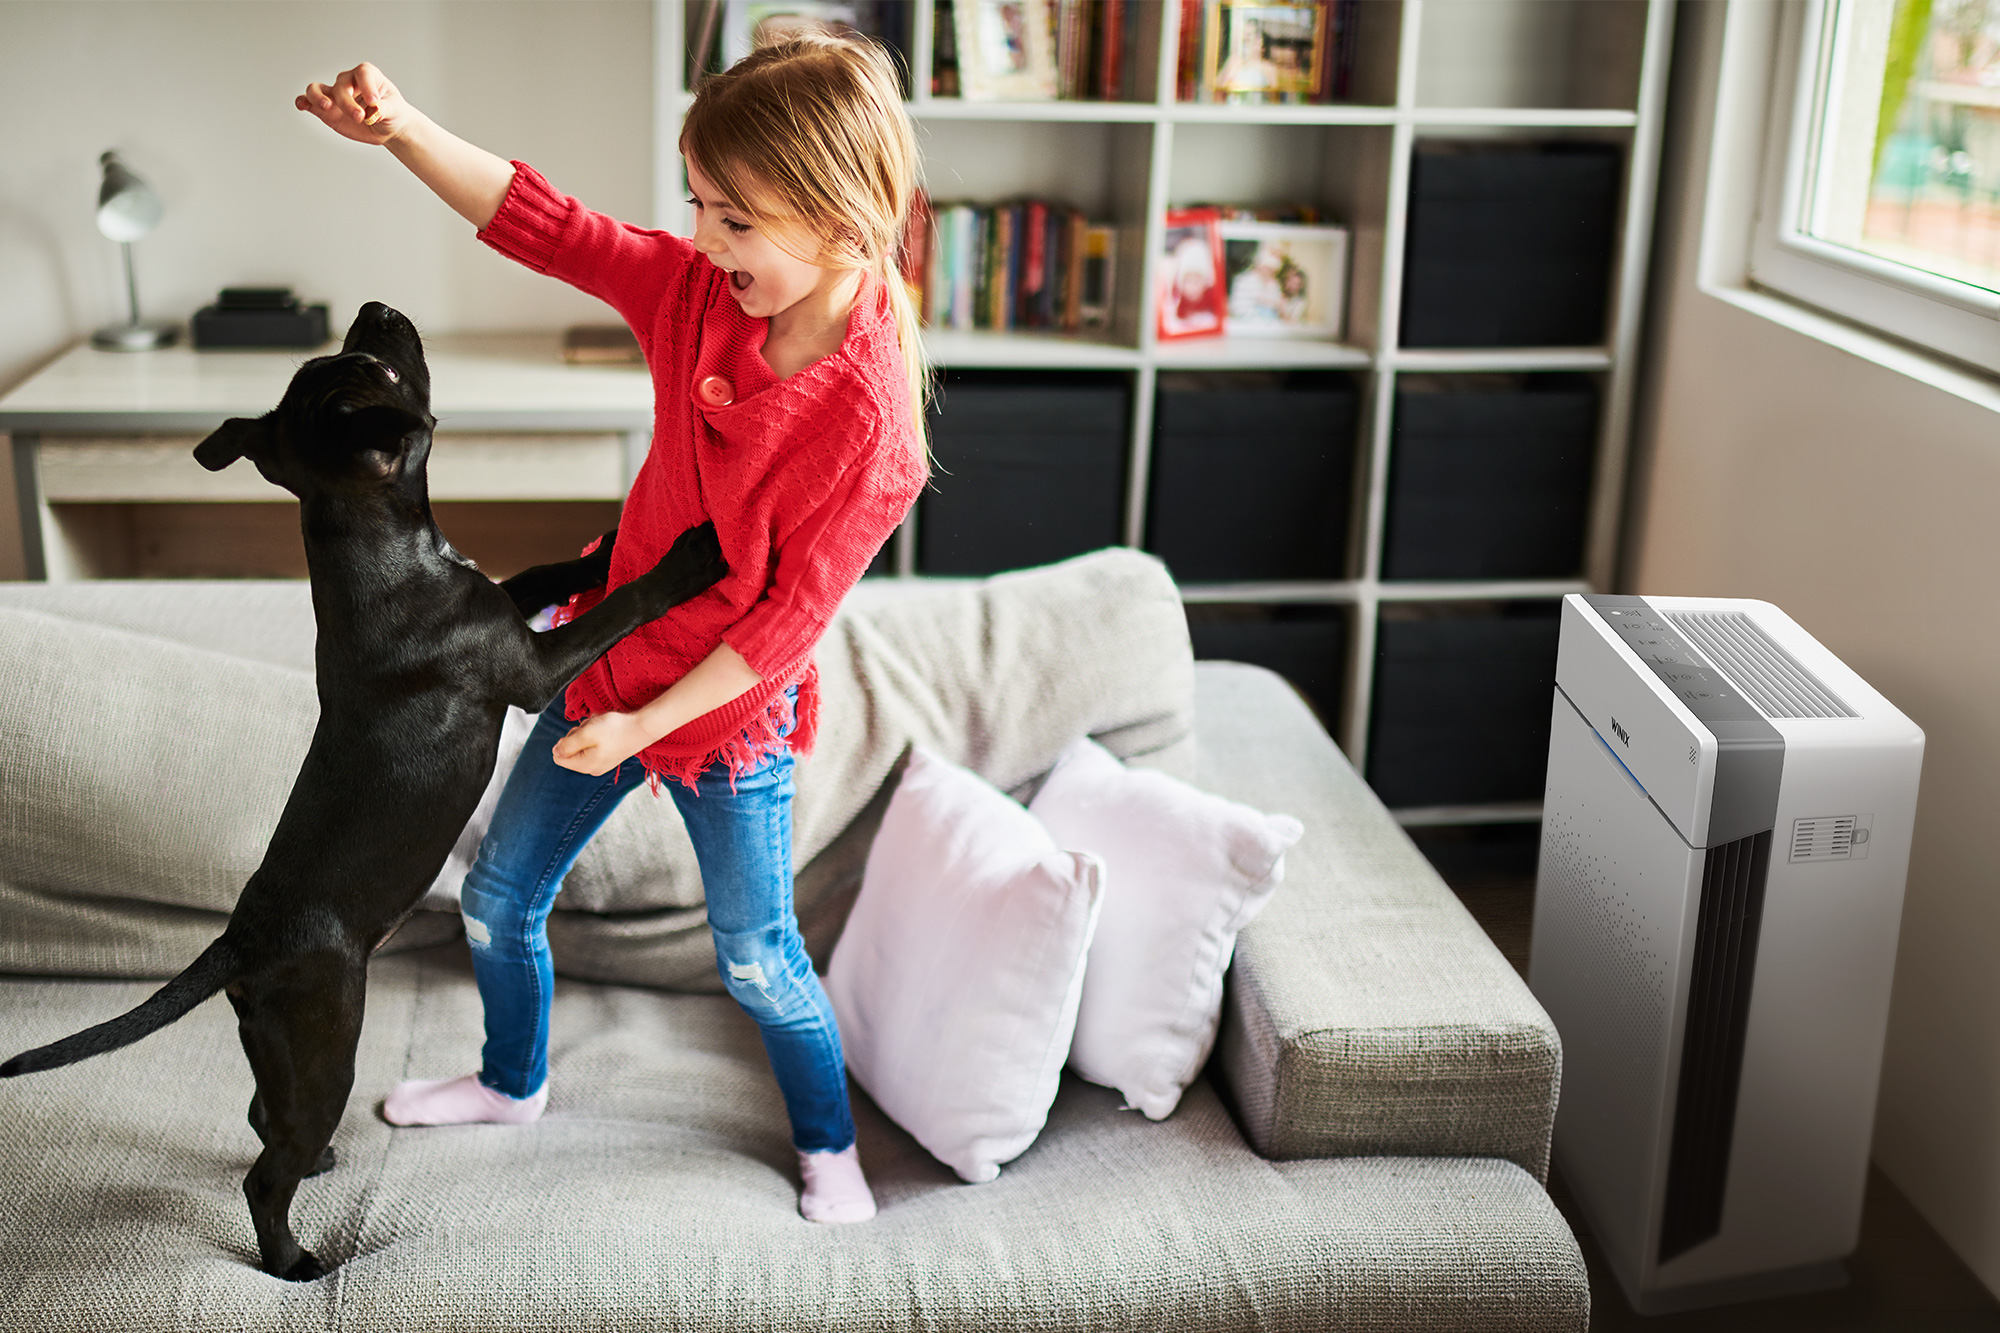 HR900 Ultimate Pet Air Purifier on floor next to young child playing with a dog